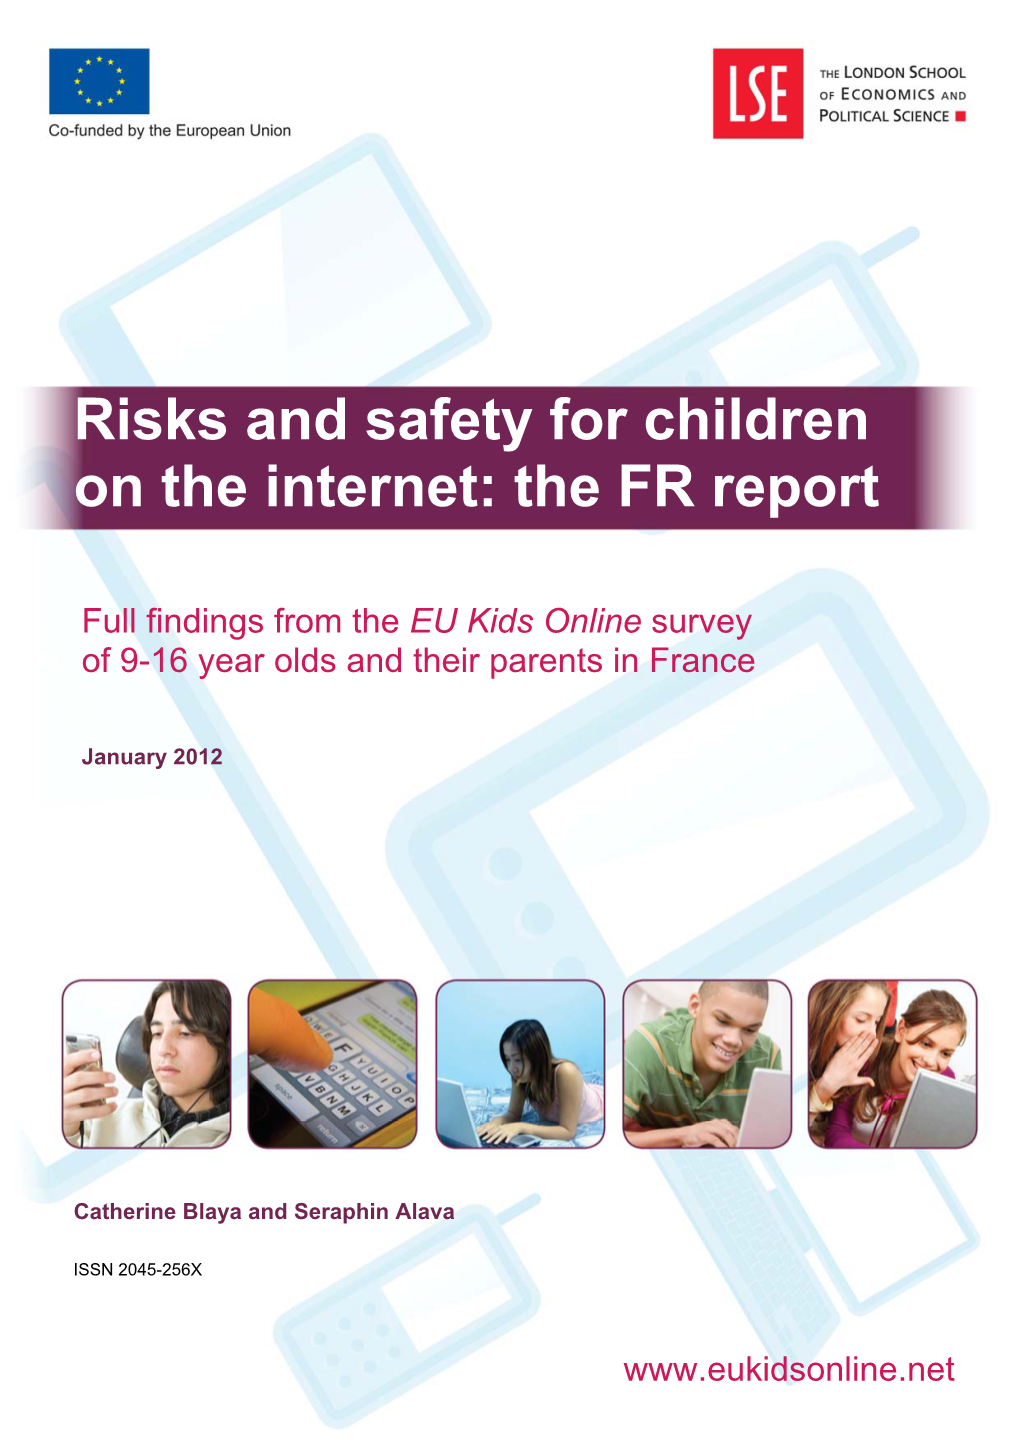 Risks and Safety for Children on the Internet: the FR Report